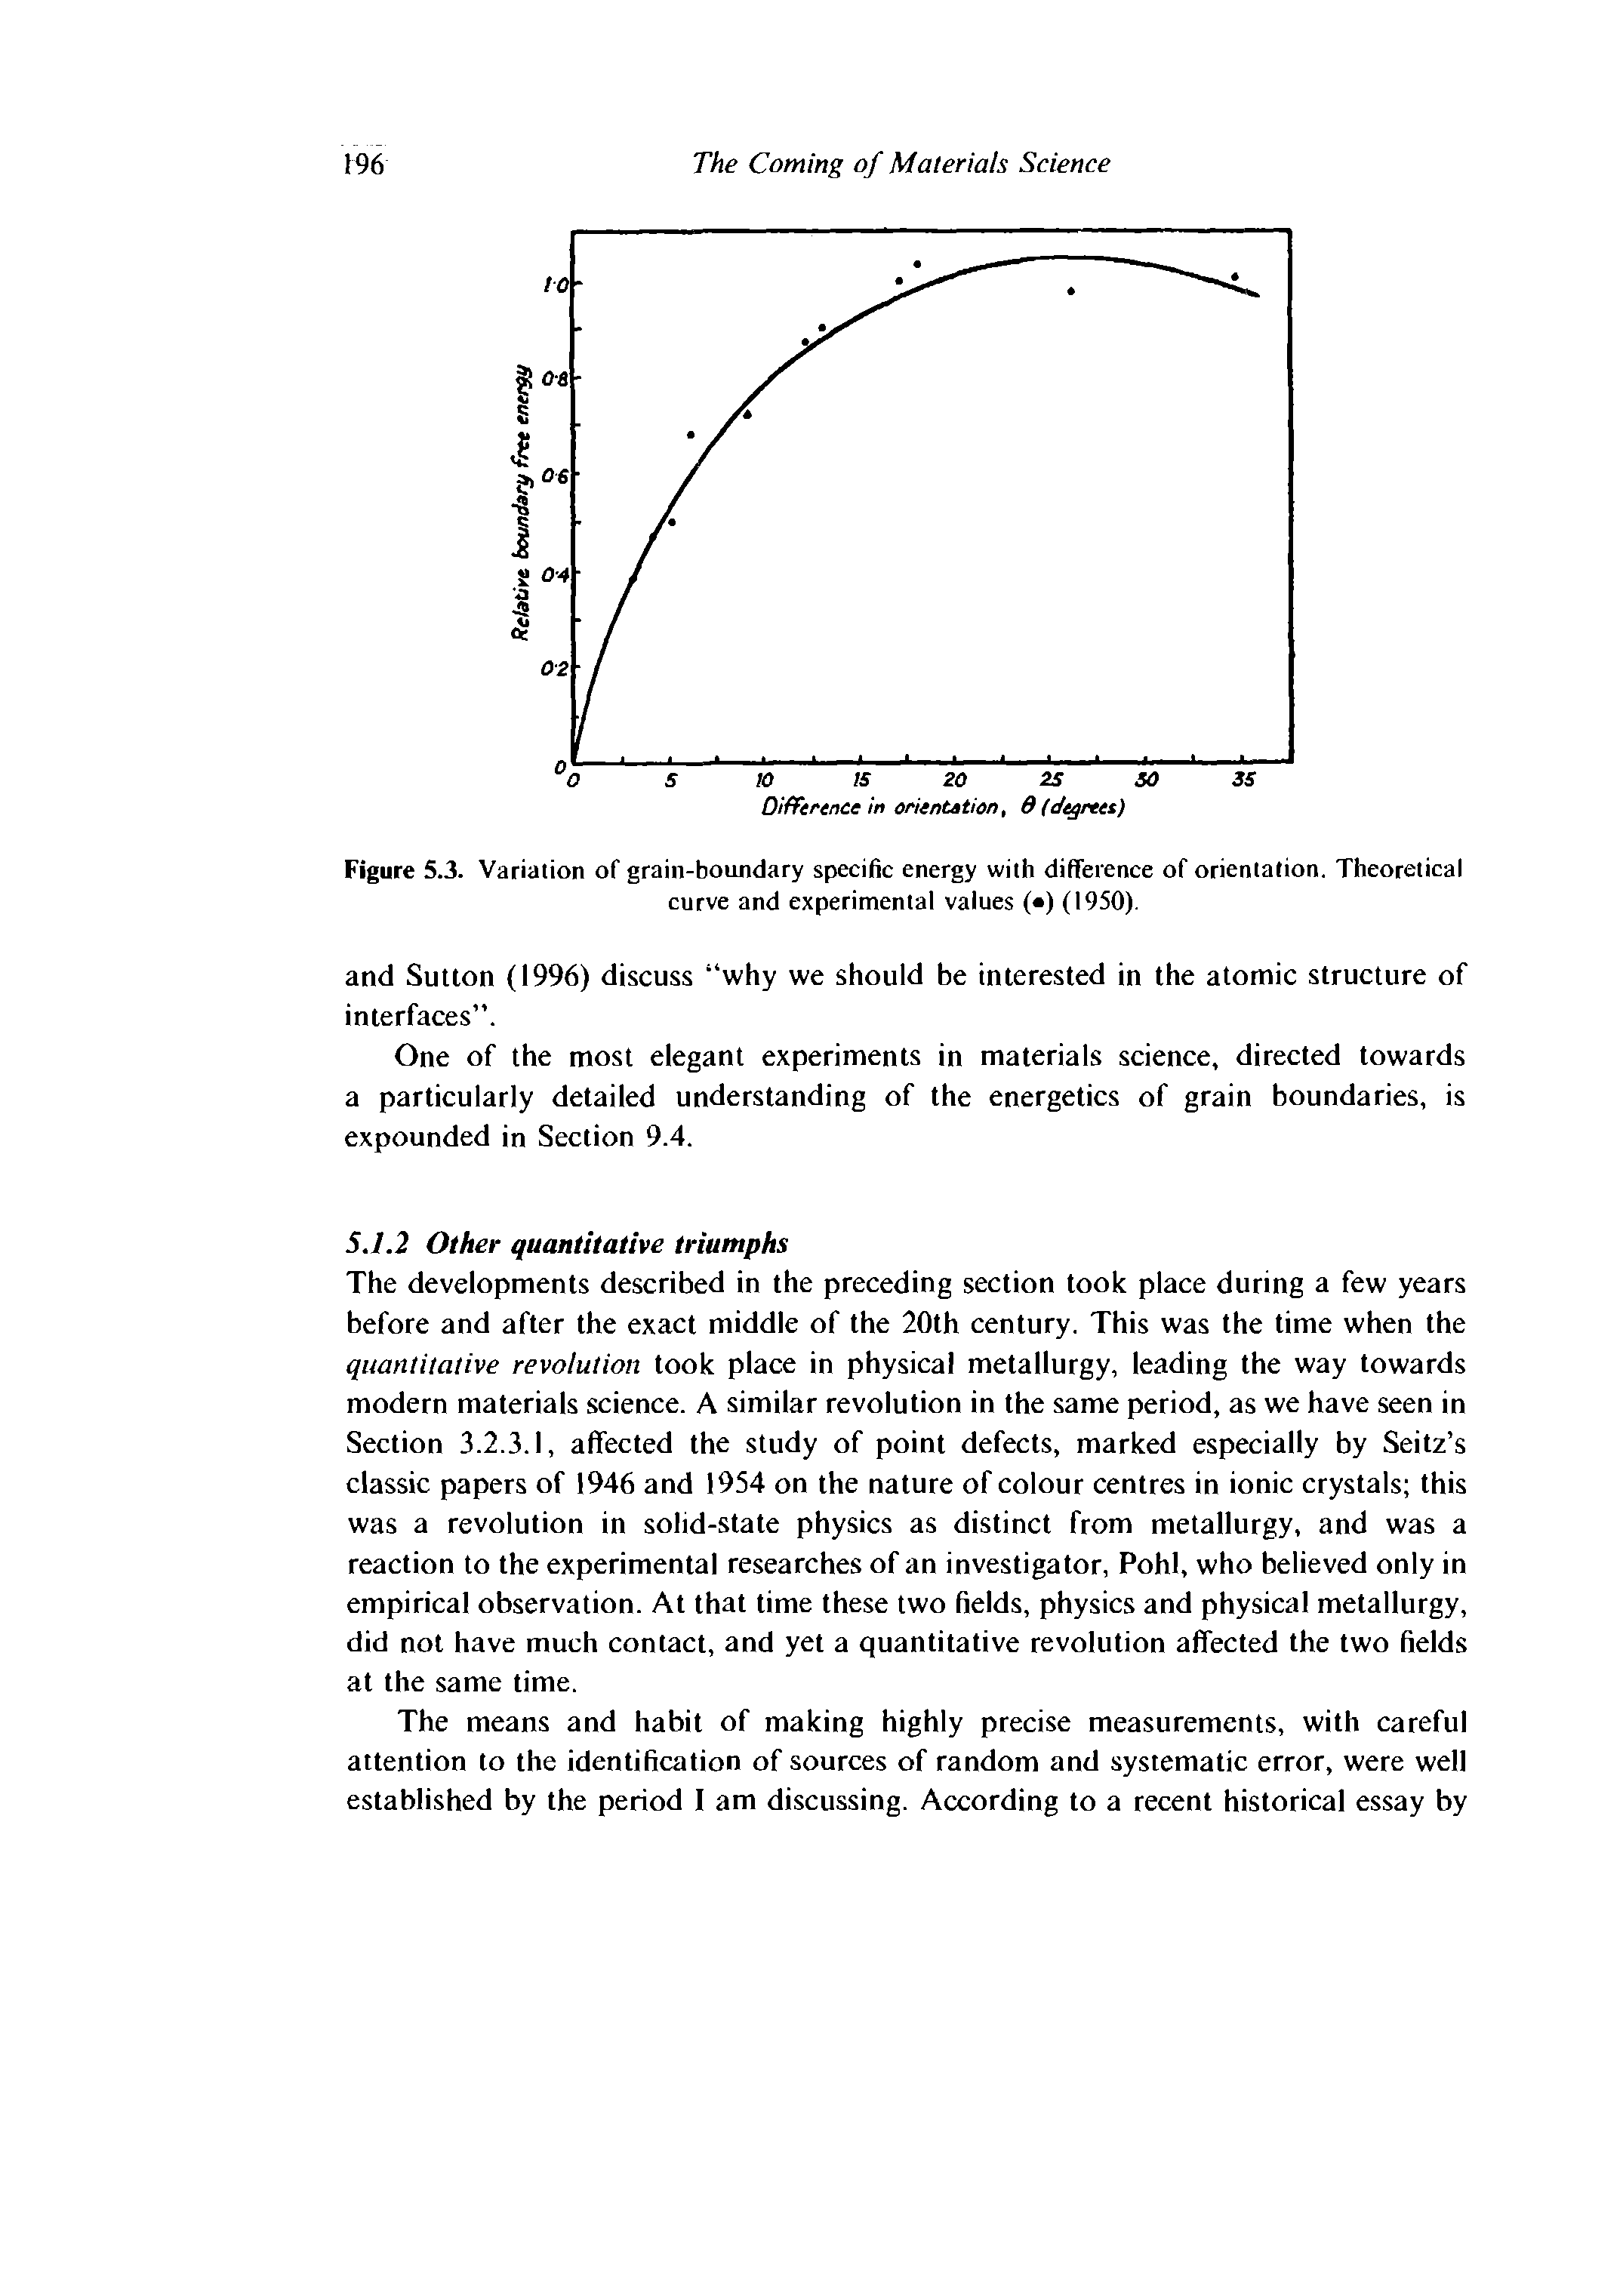 Figure 5.3. Variation of grain-boundary specific energy with difference of orientation. Theoretical curve and experimental values ( ) (1950).